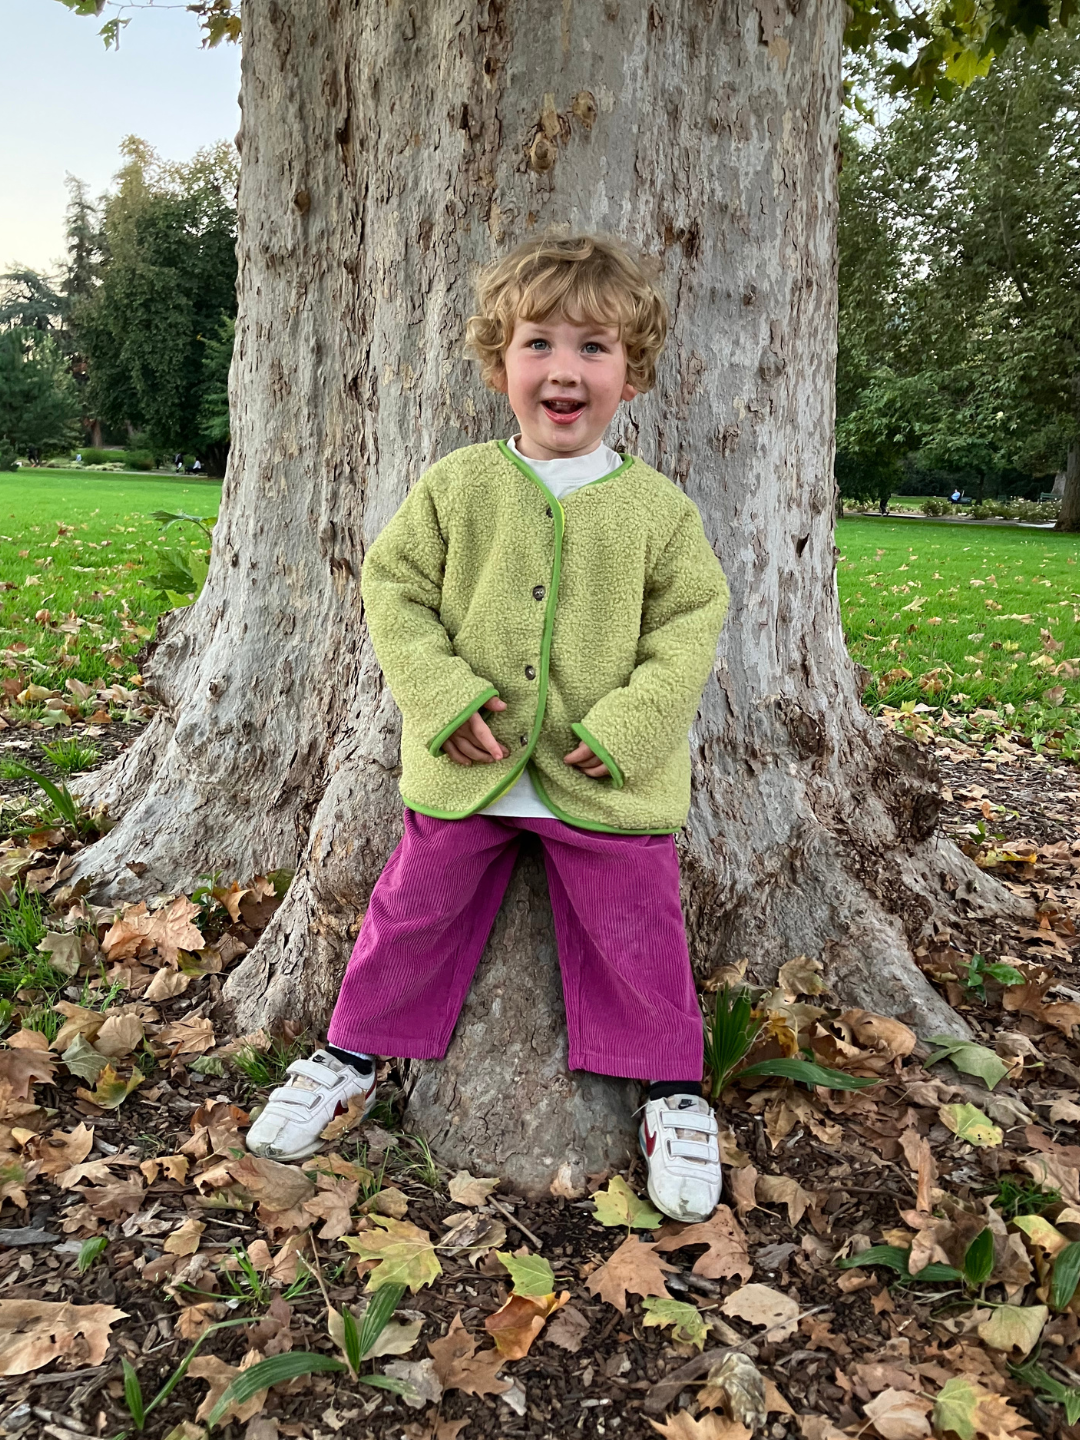 Magenta | Child in a park leaning on a tree trunk wearing magenta corduroy pants and a green fleece jacket with white velcro sneakers.